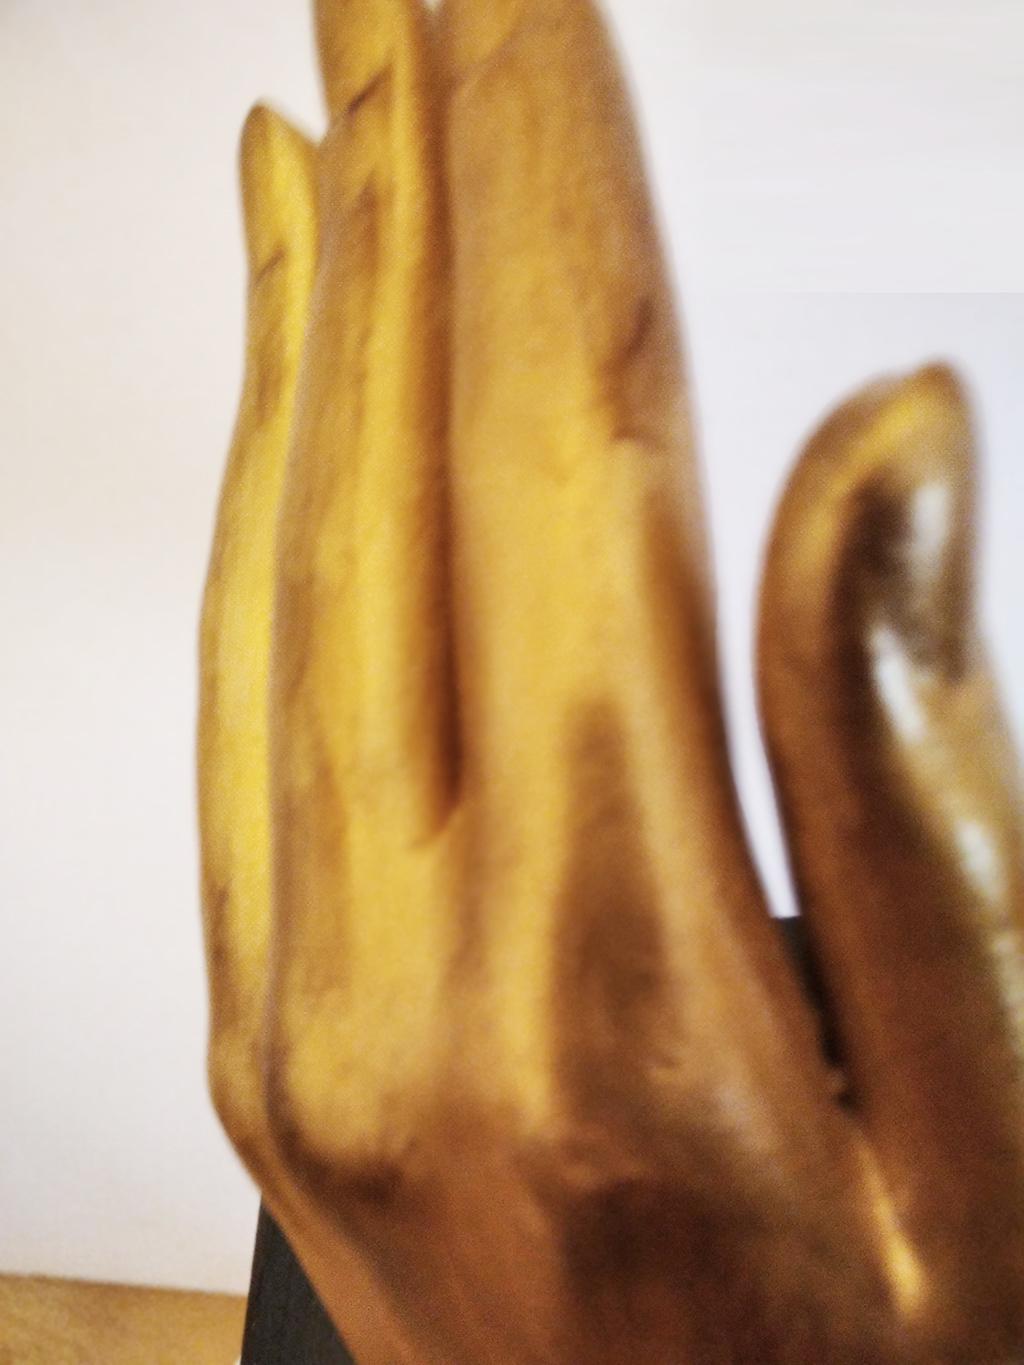 Hanger / Sculpture in the Shape of a Female Hand Gold Color For Sale 3